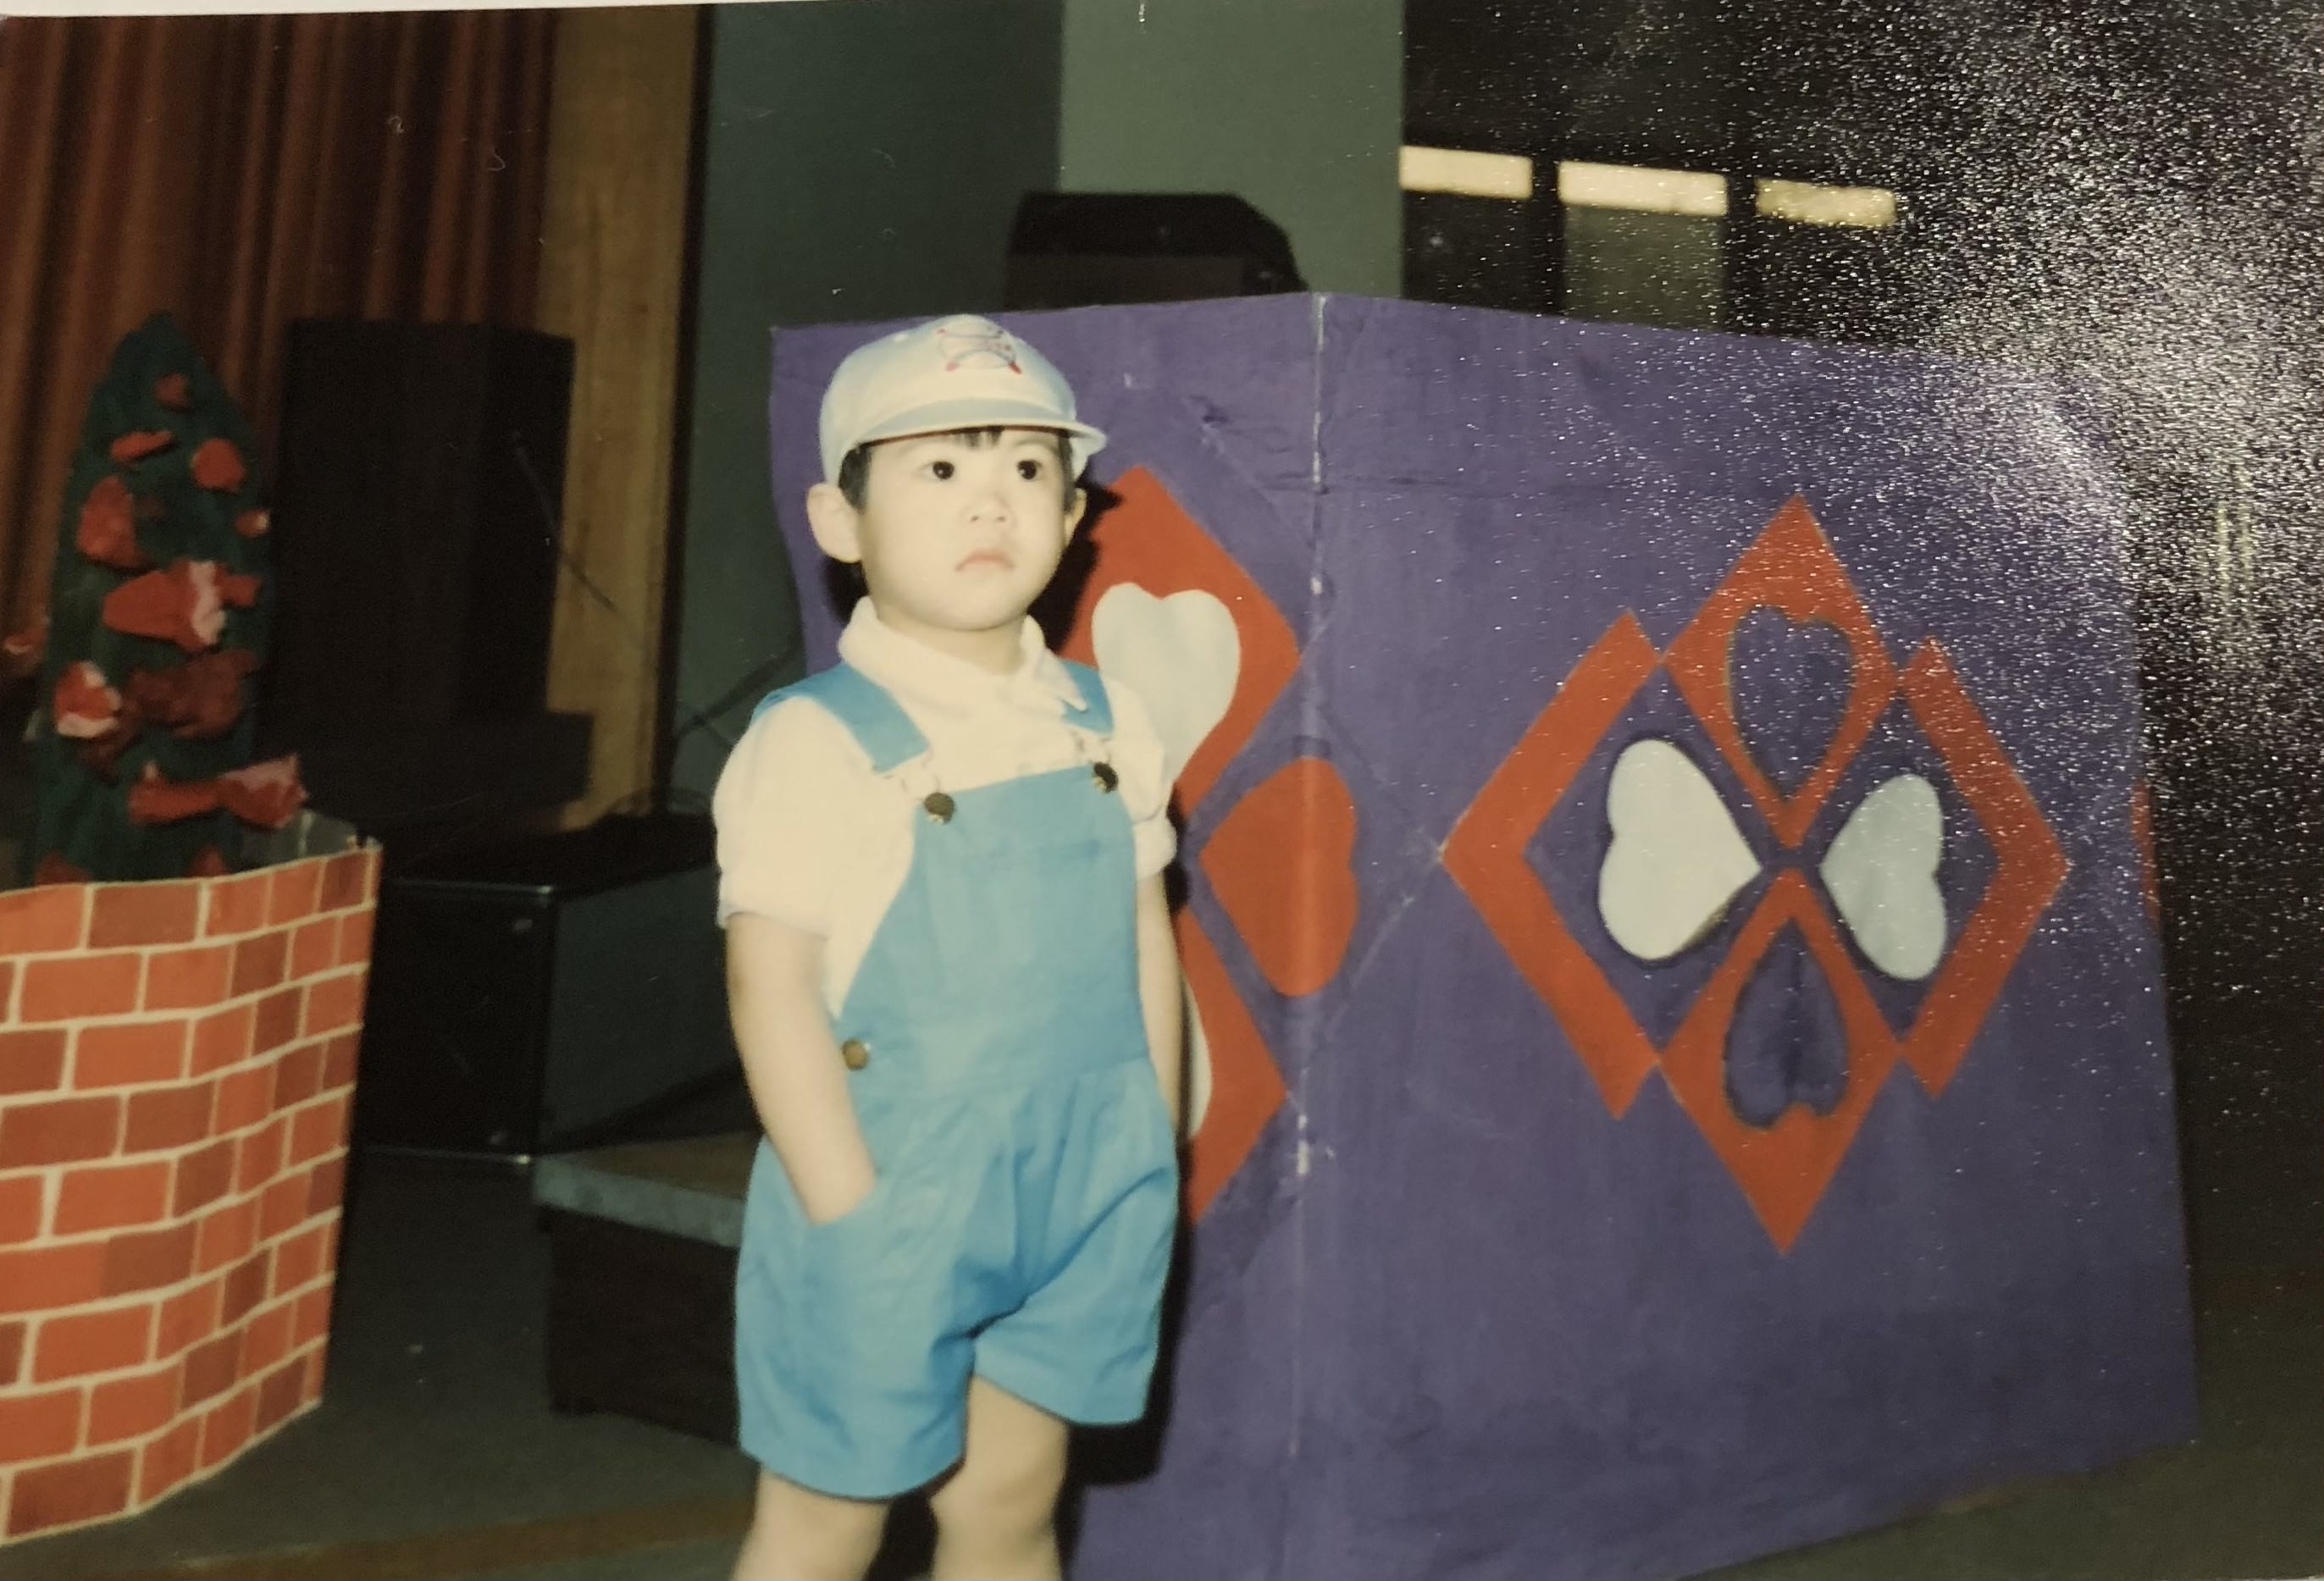 Kim Thai around 5 years old, hands in pocket wearing overalls and a baseball cap.